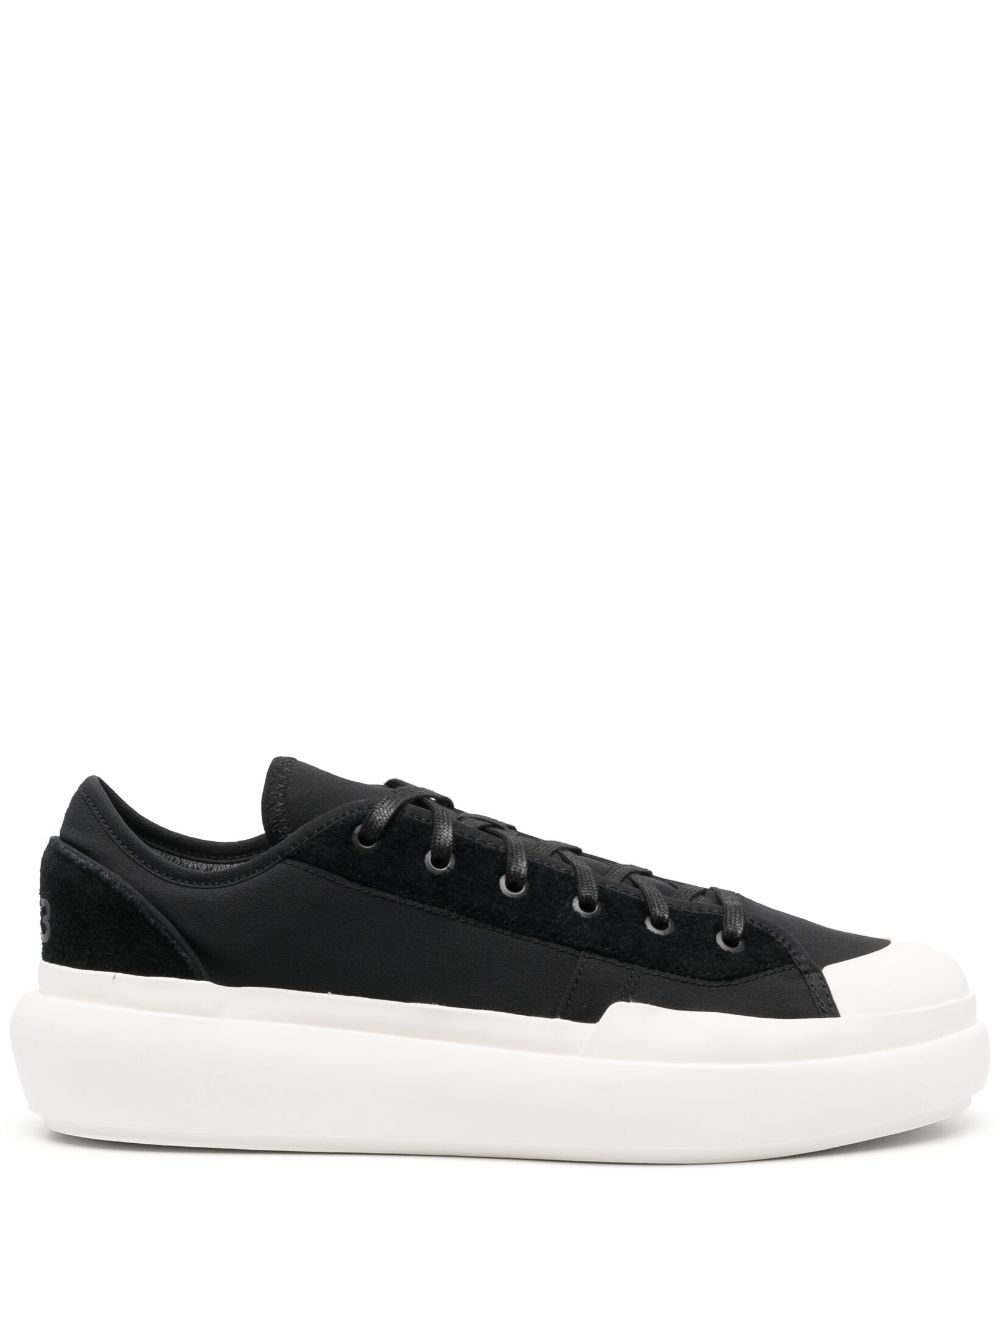 Y-3 AJATU COURT LACE-UP SNEAKERS